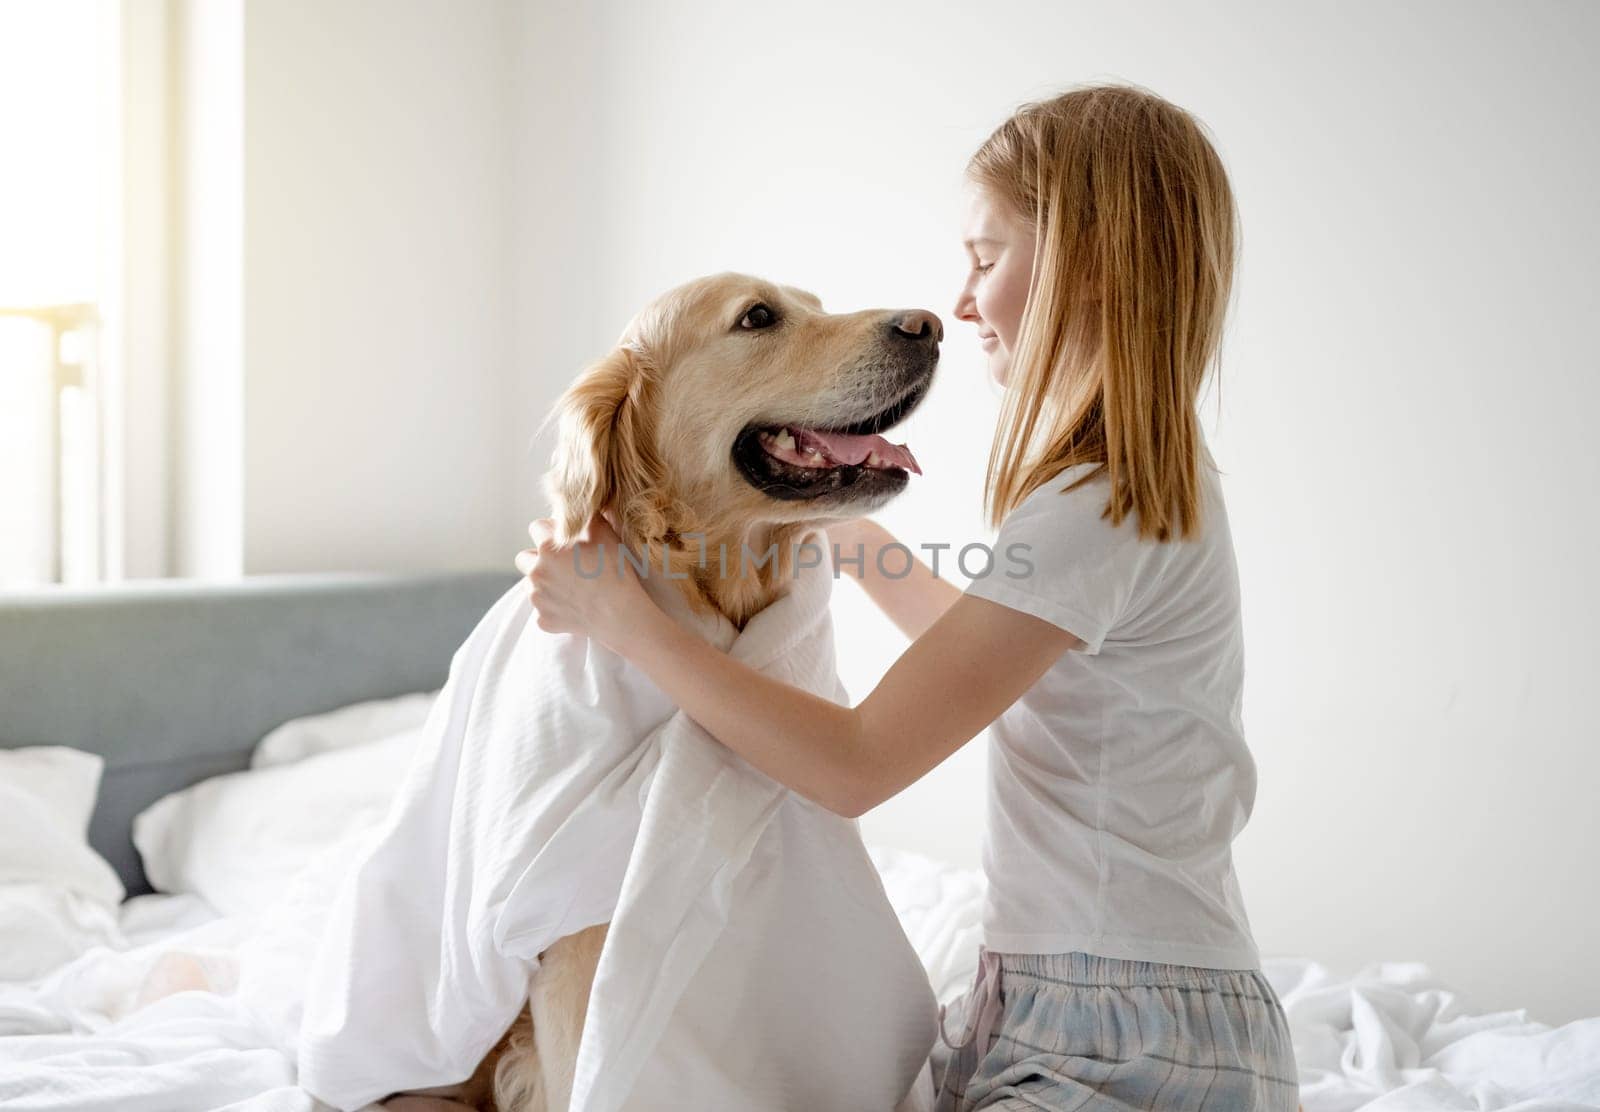 Girl Plays With Golden Retriever In Bed, Covering Him With Blanket In Bright Room In The Morning